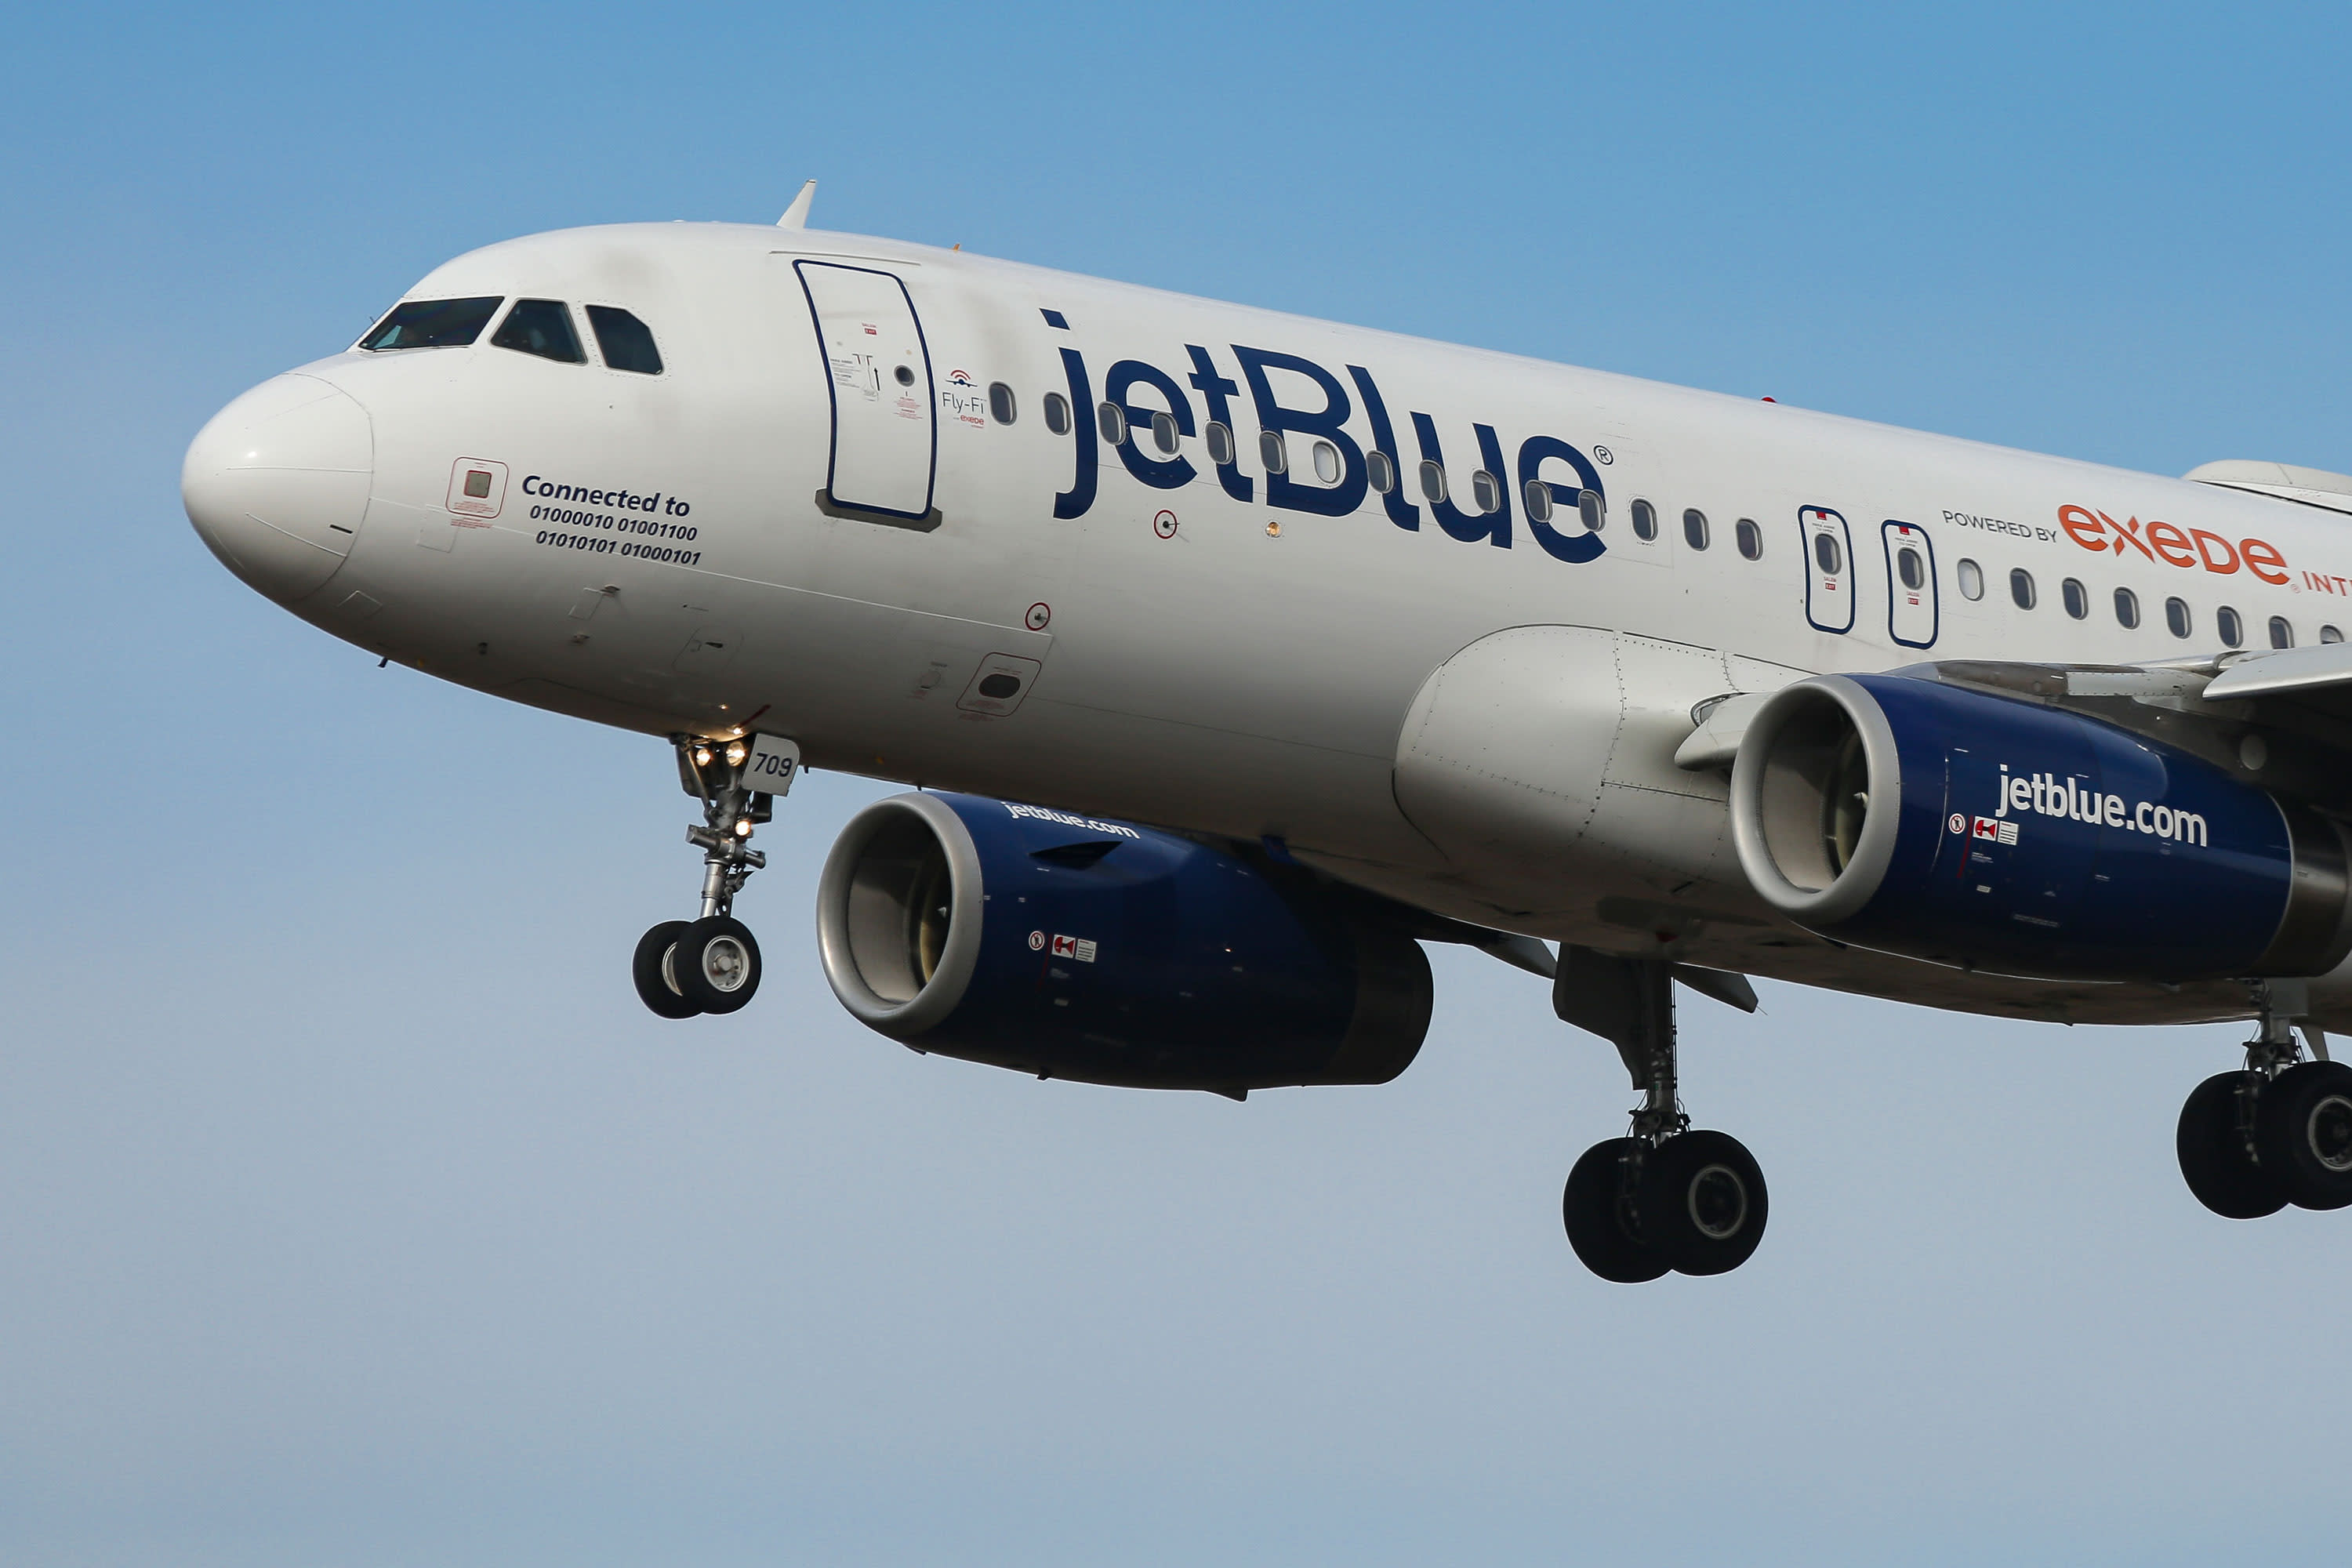 JetBlue cuts hundreds of flights through mid-January, expecting more omicron sick calls